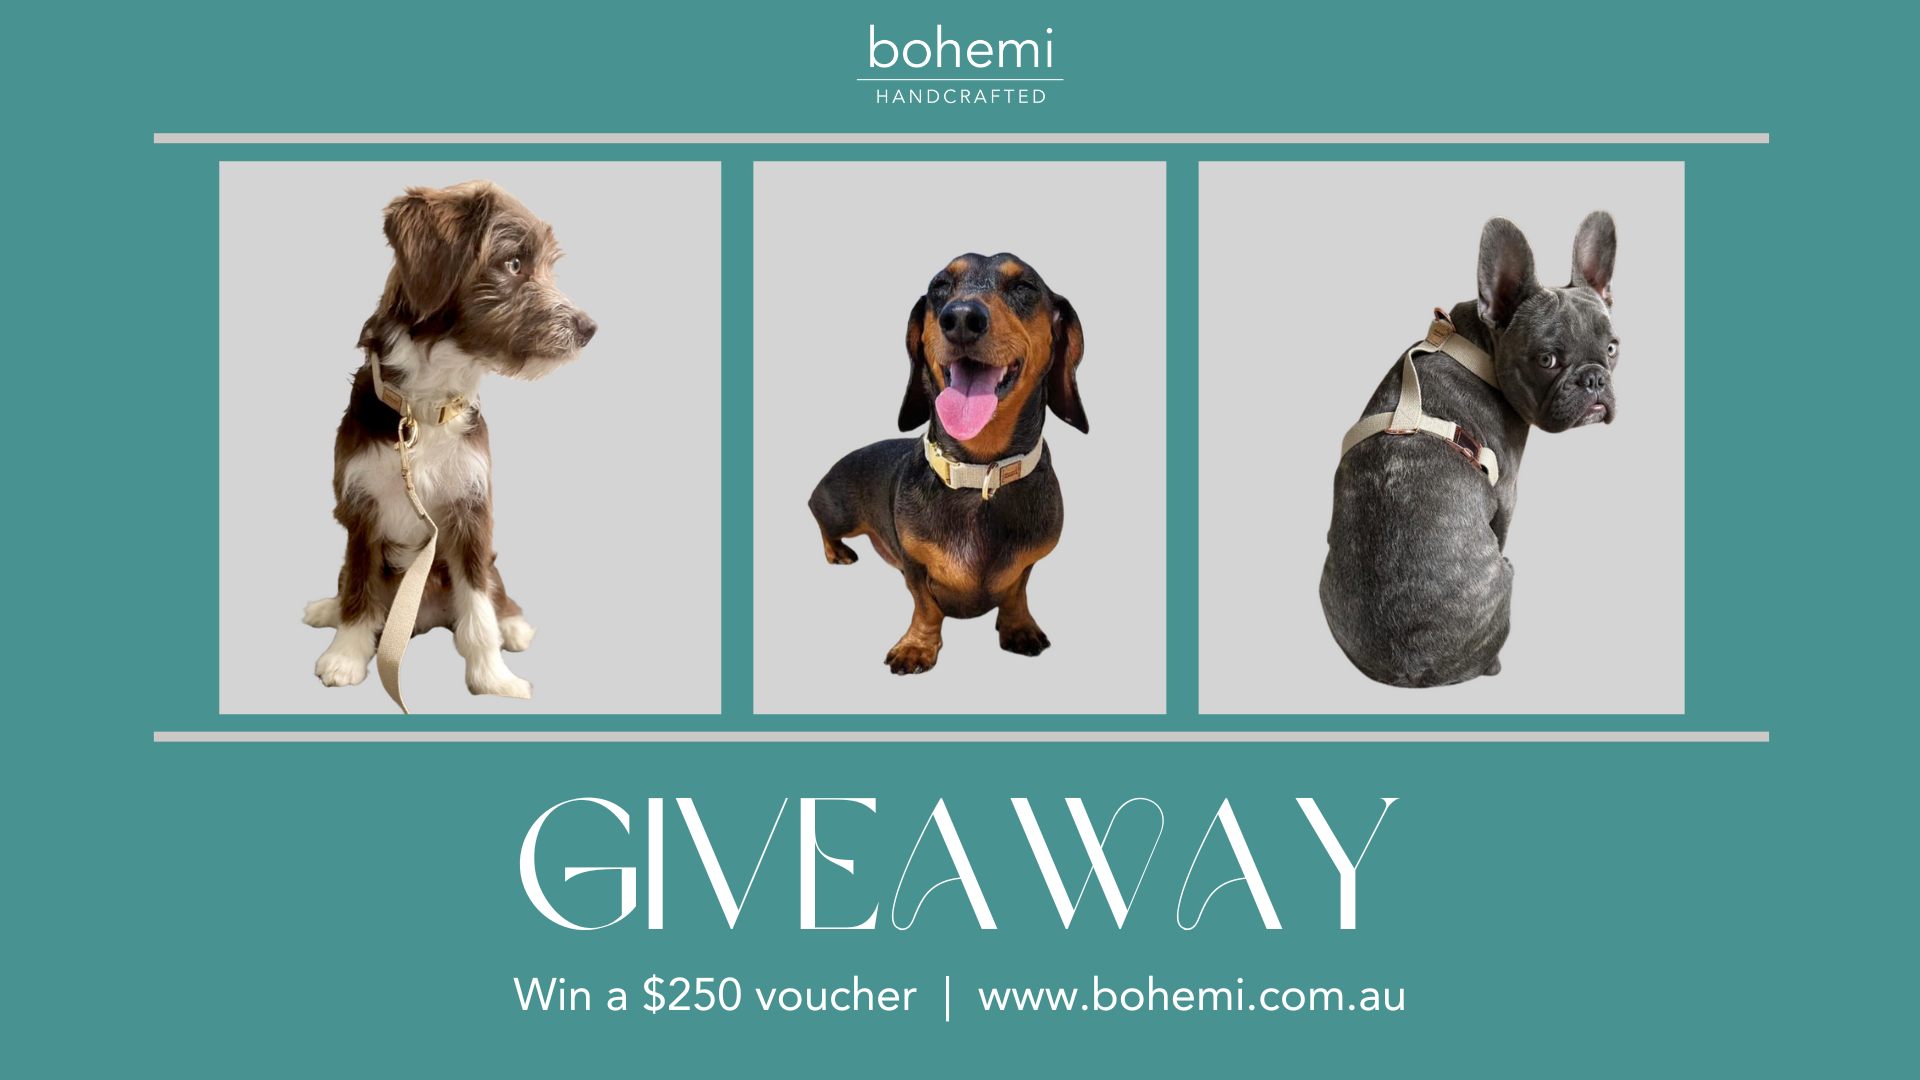 WIN a $250 voucher to spend online at Bohemi